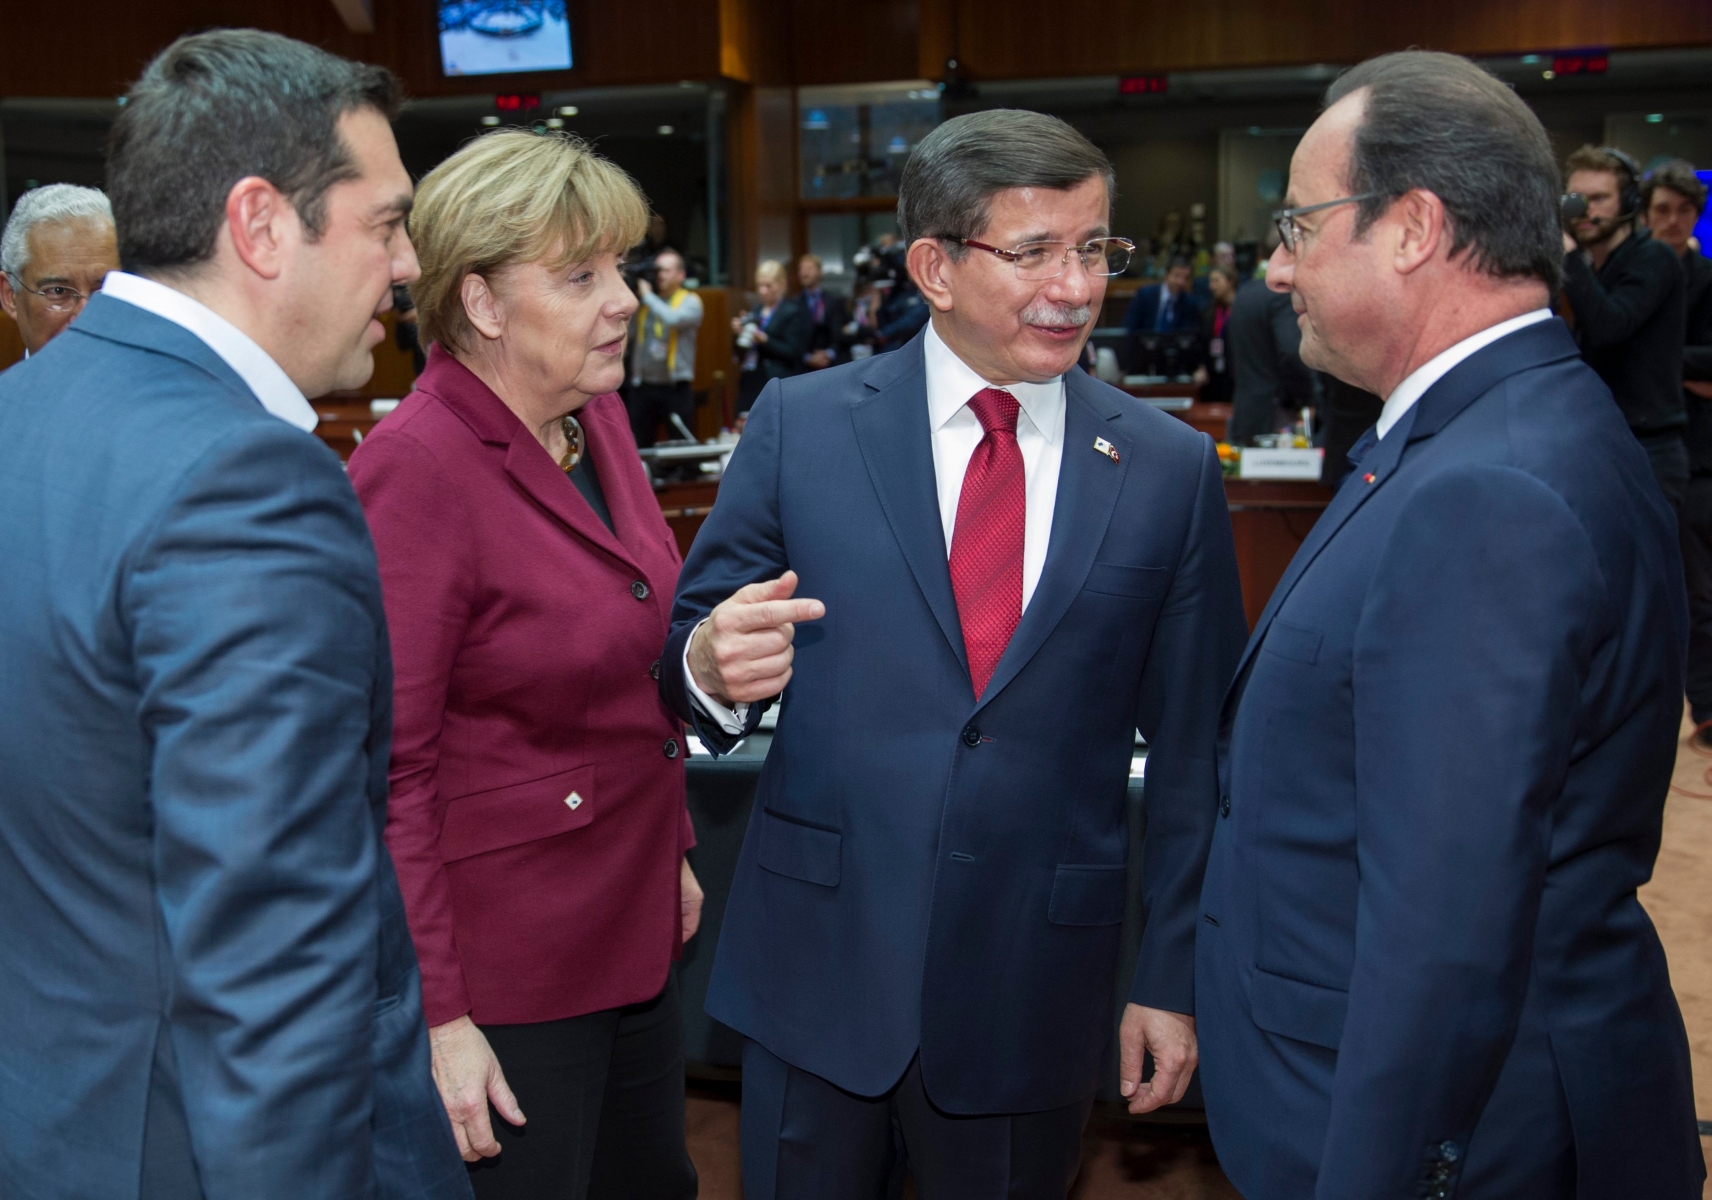 epa05047819 (L-R) Greek Prime Minister Alexis Tsipras, German Chancellor Angela Merkel chats with Turkish Prime Minister Ahmet Davutoglu and French President Francois Hollande, at the start of an extraordinary EU Summit with Turkey in Brussels, Belgium, 29 November 2015. The European Union hopes to secure Ankara's concrete help in stemming a surge in migration, at a joint summit in Brussels, with the bloc offering financial aid and closer ties in return. Europe is facing its largest people movements since World War II, with almost 900,000 migrants and asylum seekers arriving this year. Many, including large numbers from war-torn Syria, transit through Turkey and board boats headed for Greece.  EPA/OLIVIER HOSLET BELGIUM EU TURKEY SUMMIT